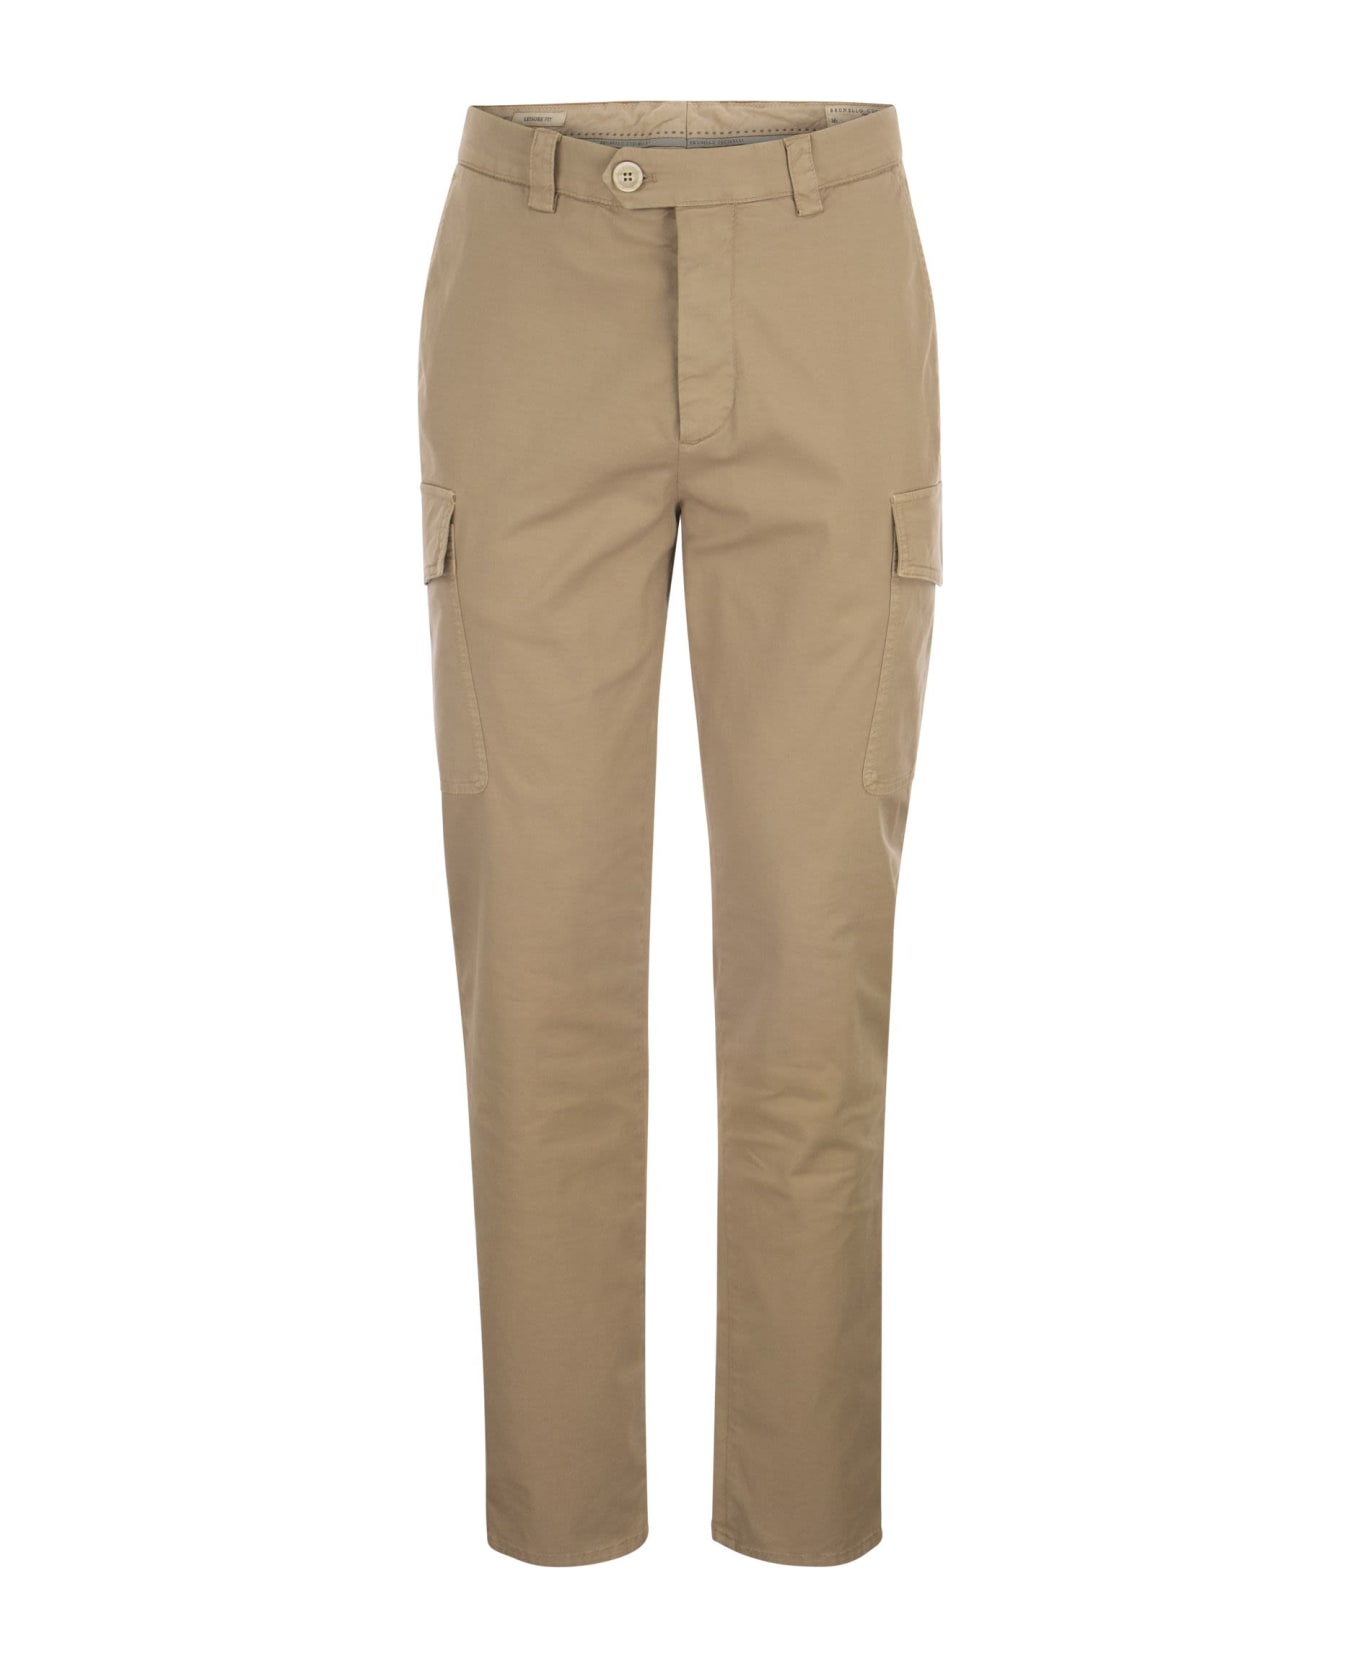 Brunello Cucinelli Garment-dyed Leisure Fit Trousers - Sand ボトムス